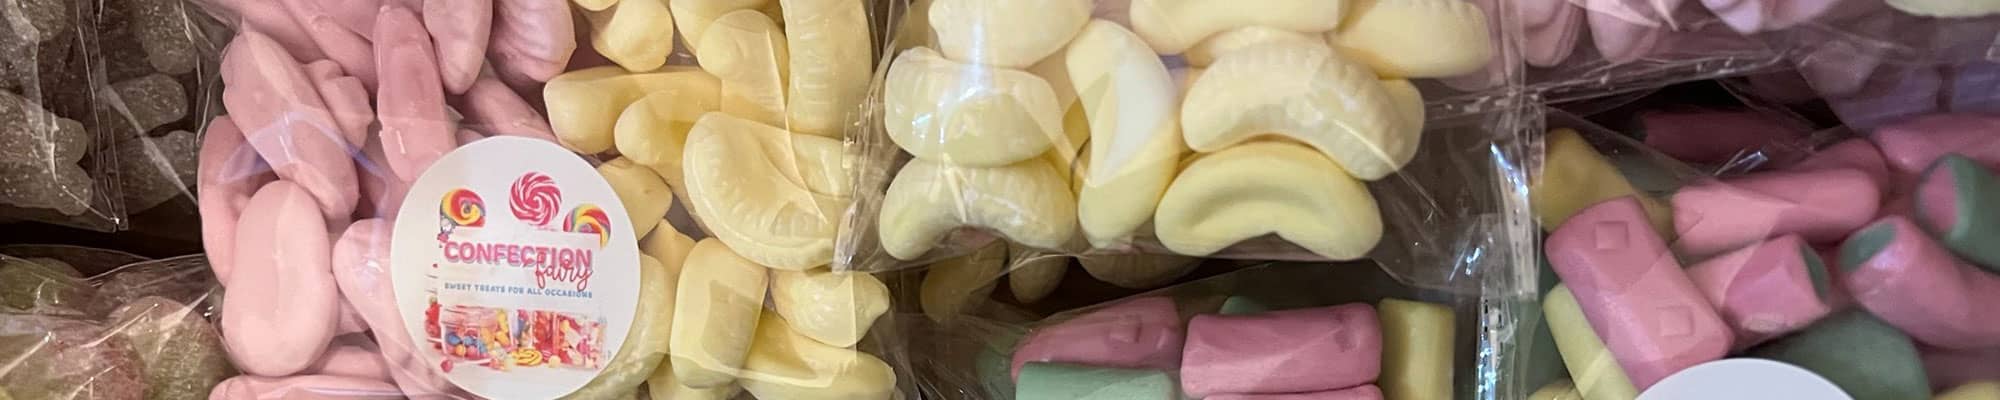 Sweets available to buy from Confectionfairy in Wrexham